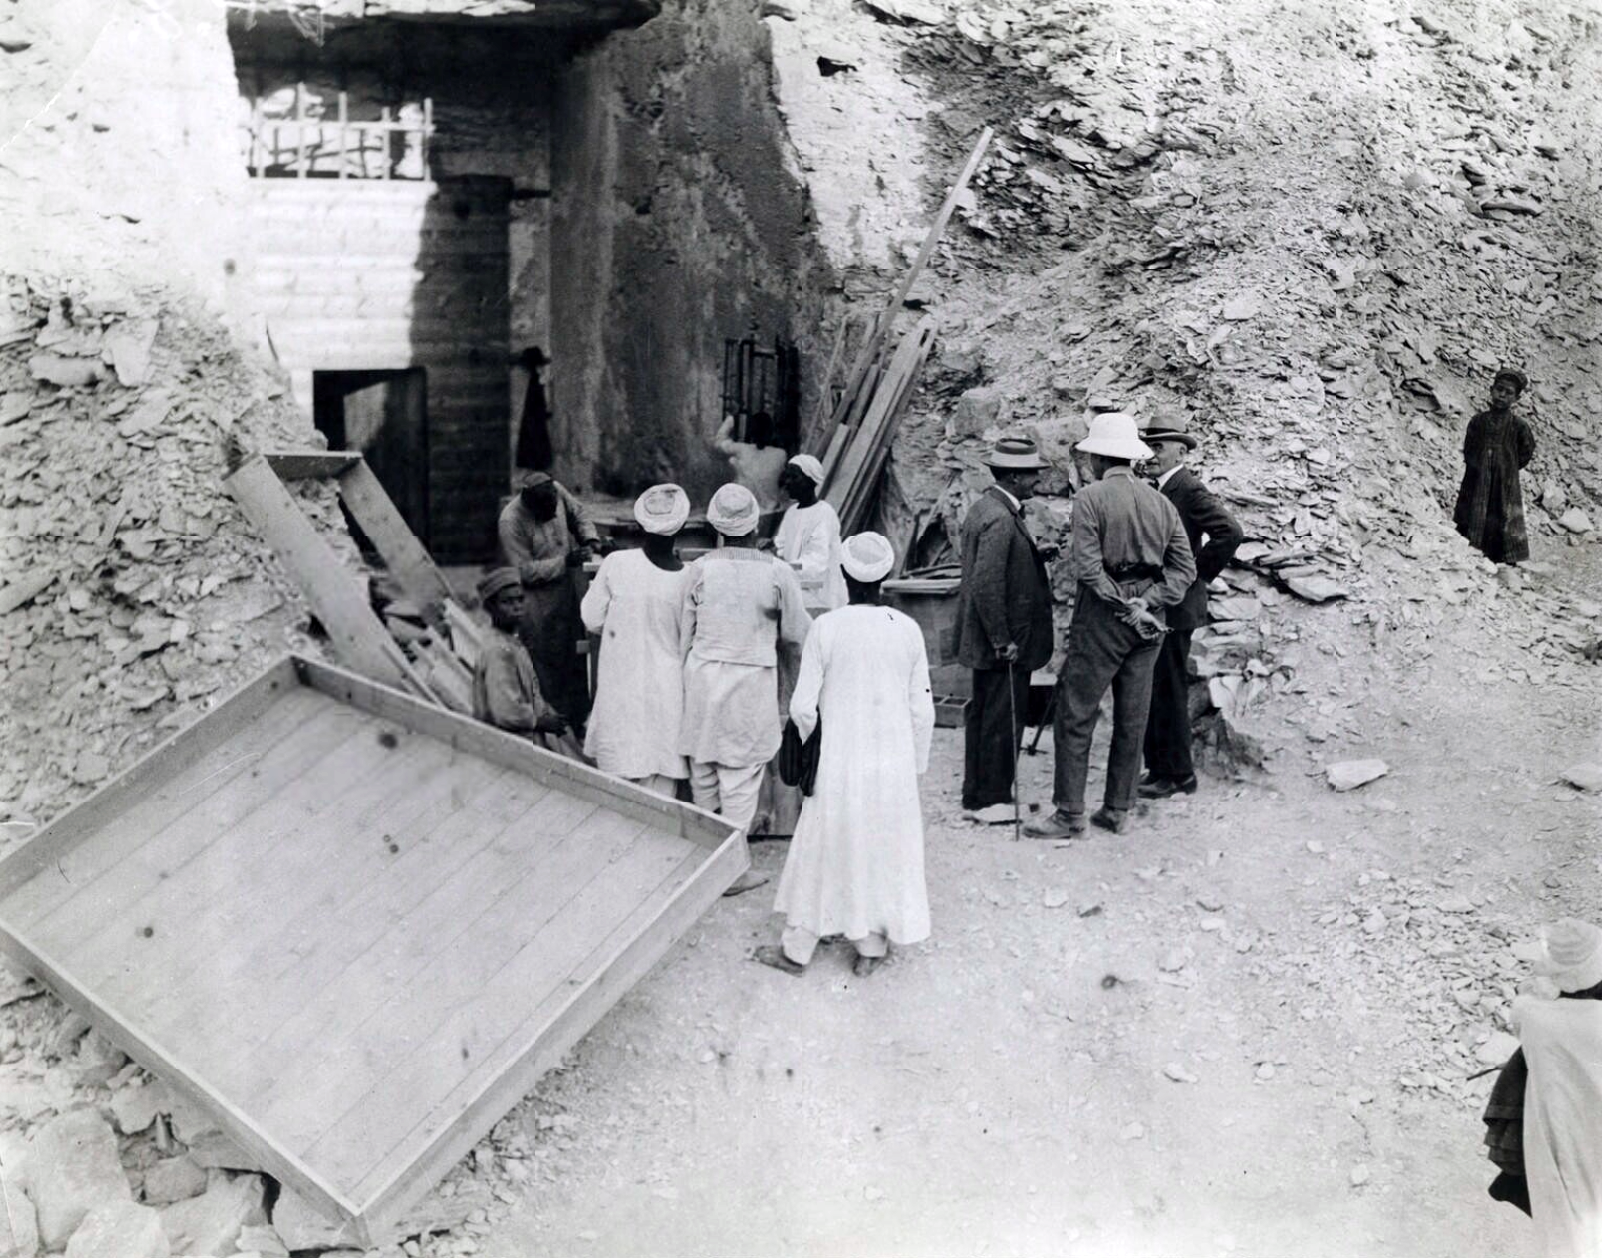 George Edward Stanhope Molyneux Herbert, Fifth Earl of Carnarvon, with Howard Carter during his initial visit to the tomb, 1922, 7 5/8 x 9 5/8 inches (National Portrait Gallery, London; photo: Keystone Press Agency Ltd.)